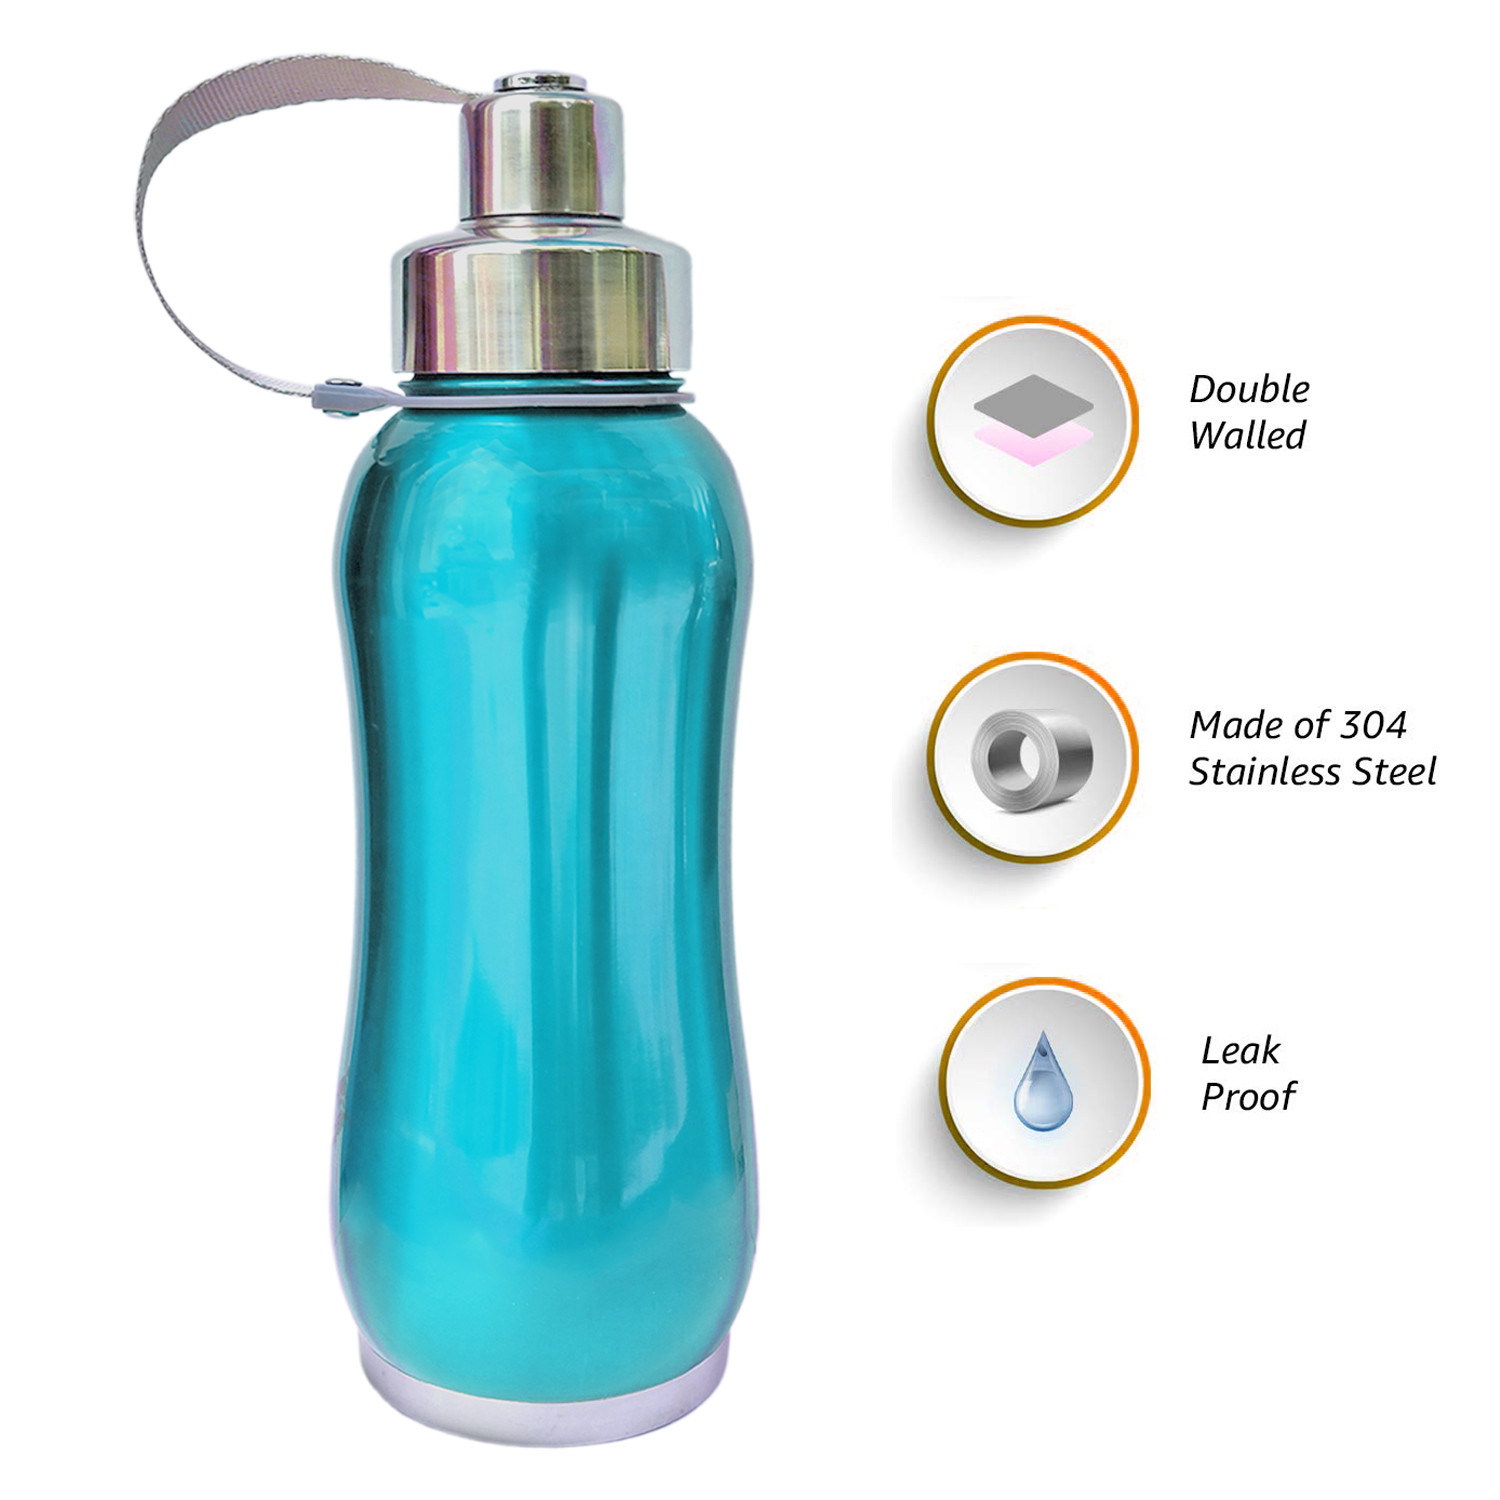 Kuber Industries Stainless Steel Insulated Water Bottle With Strainer For Home & Traveling, 750ML (Blue) 54KM4317